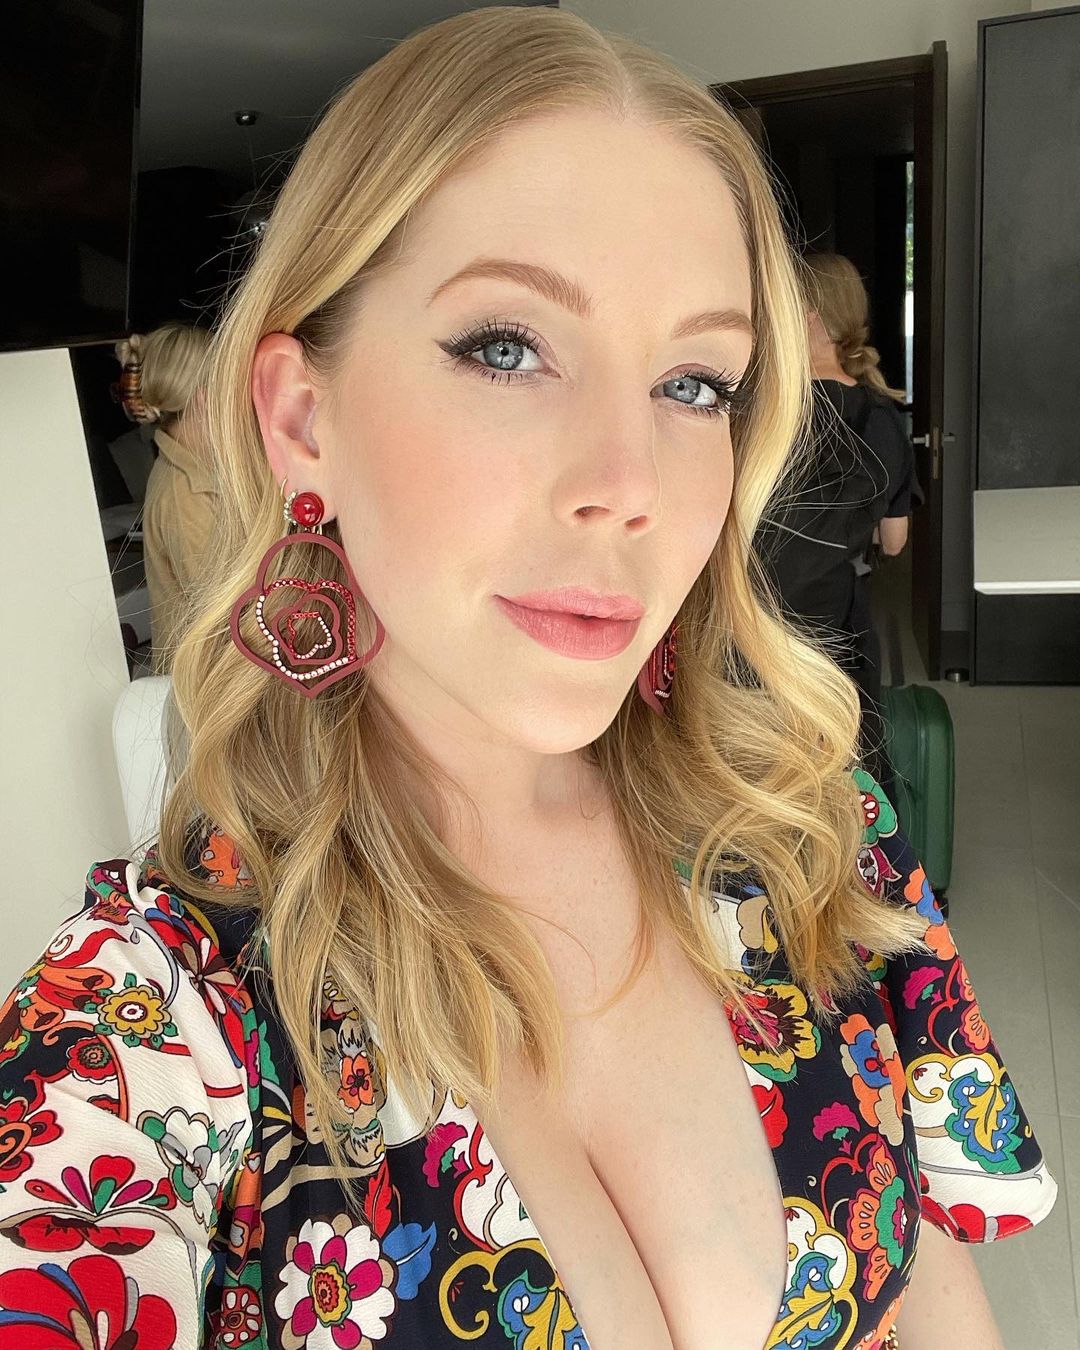 Actress Katherine Ryan reveals she hid pregnancy for fear she would lose work opportunities.